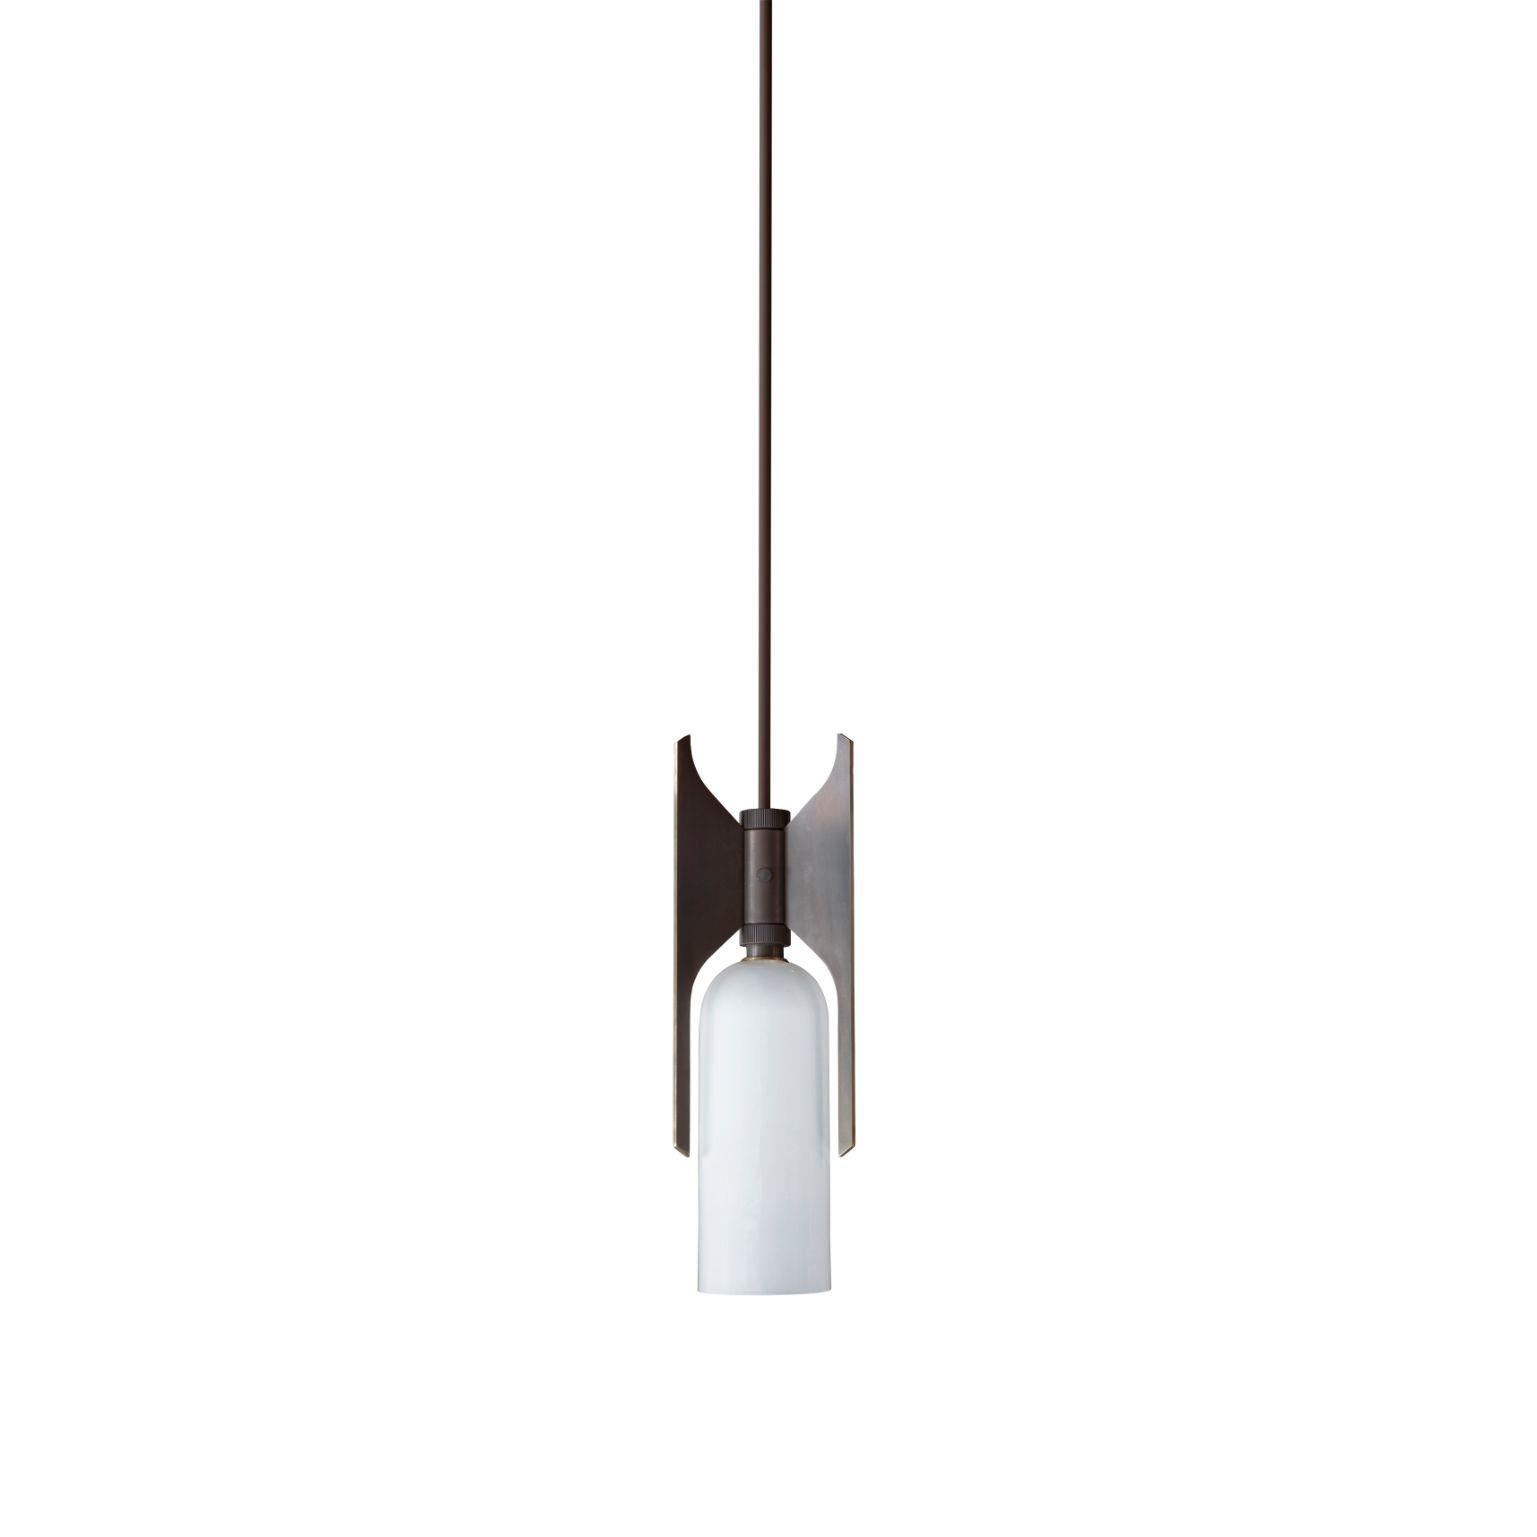 Pennon pendant light - bronze by Bert Frank
Dimensions: 42 (only lamp) x 13.9 x 15.7 cm
Materials: Bronze, bone China

When Adam Yeats and Robbie Llewellyn founded Bert Frank in 2013 it was a meeting of minds and the start of a collaborative